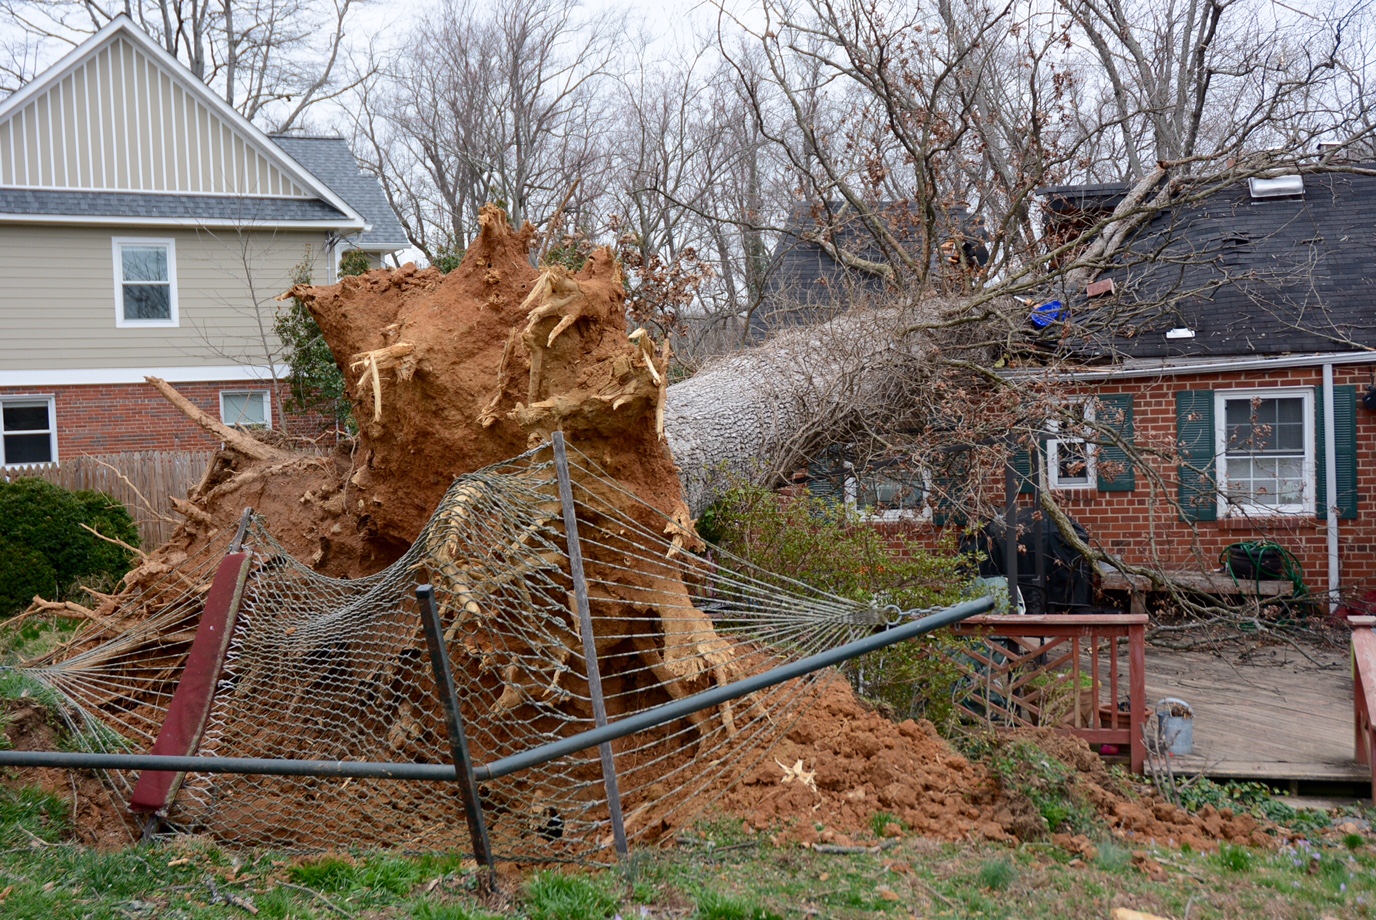 A large tree slammed into a home on Parkwood Court in Kensington. An occupant was in the lower level at the time and no one was injured. The family has been displaced because of the damage. (WTOP/Dave Dildine)